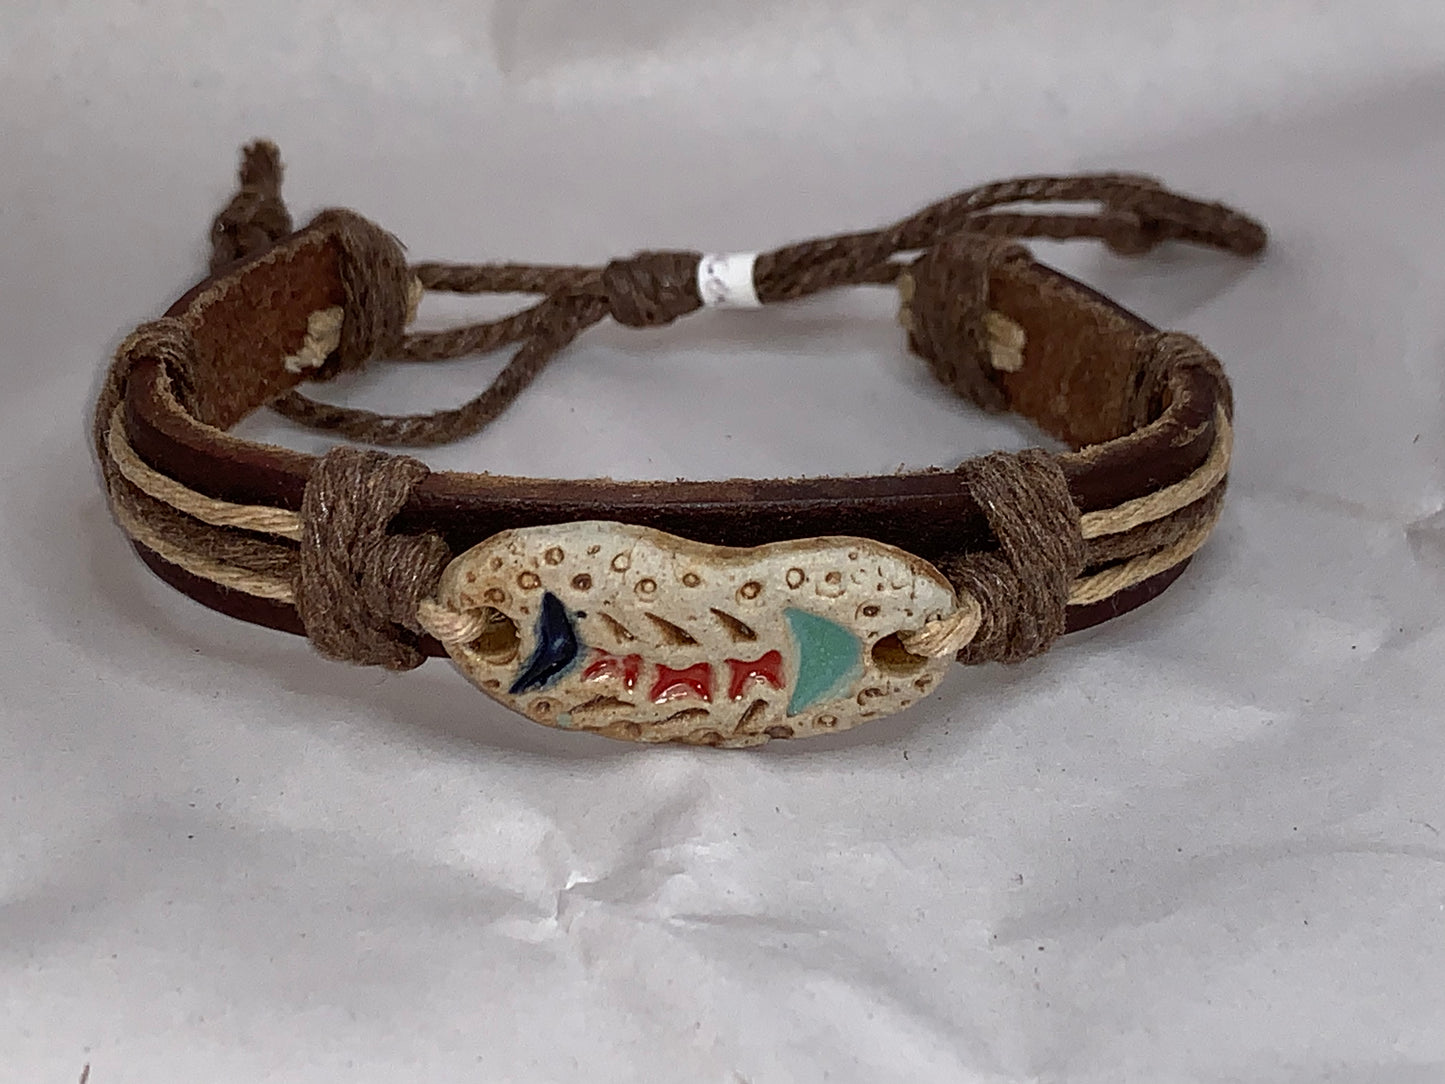 12" Long Leather Bracelet with Fish focal bead